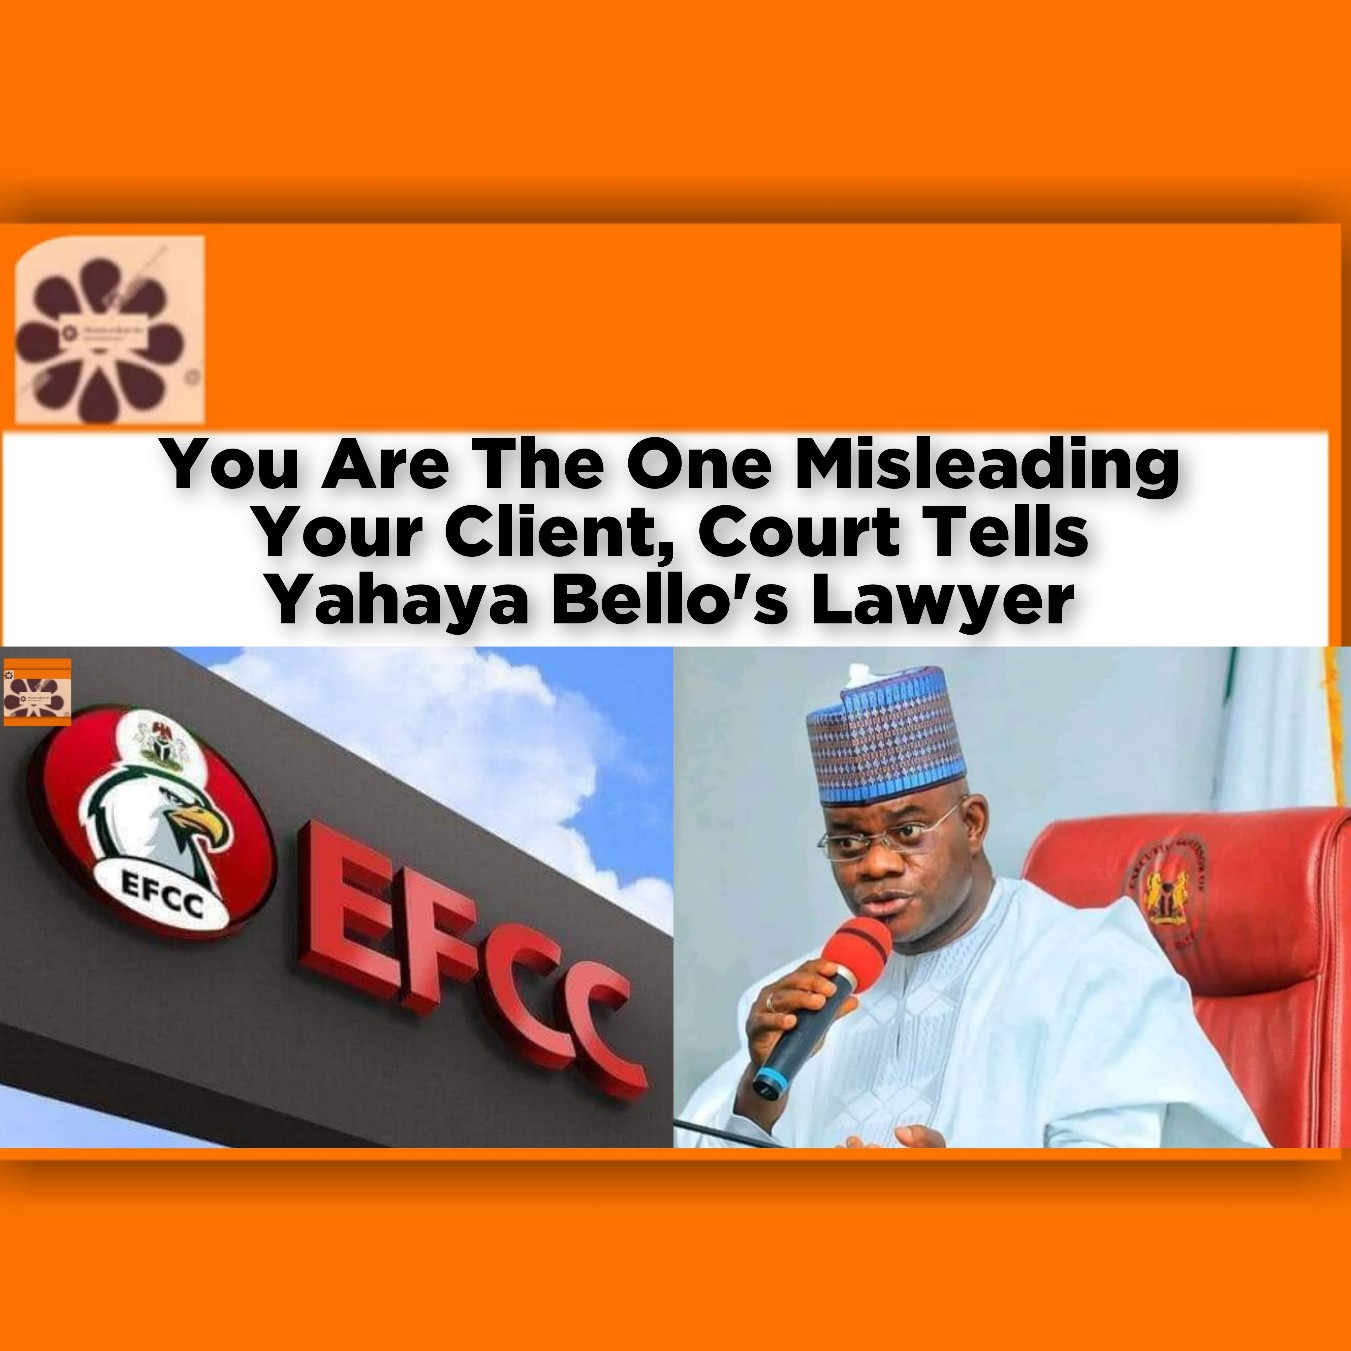 You Are The One Misleading Your Client, Court Tells Yahaya Bello's Lawyer ~ OsazuwaAkonedo #Islamabad